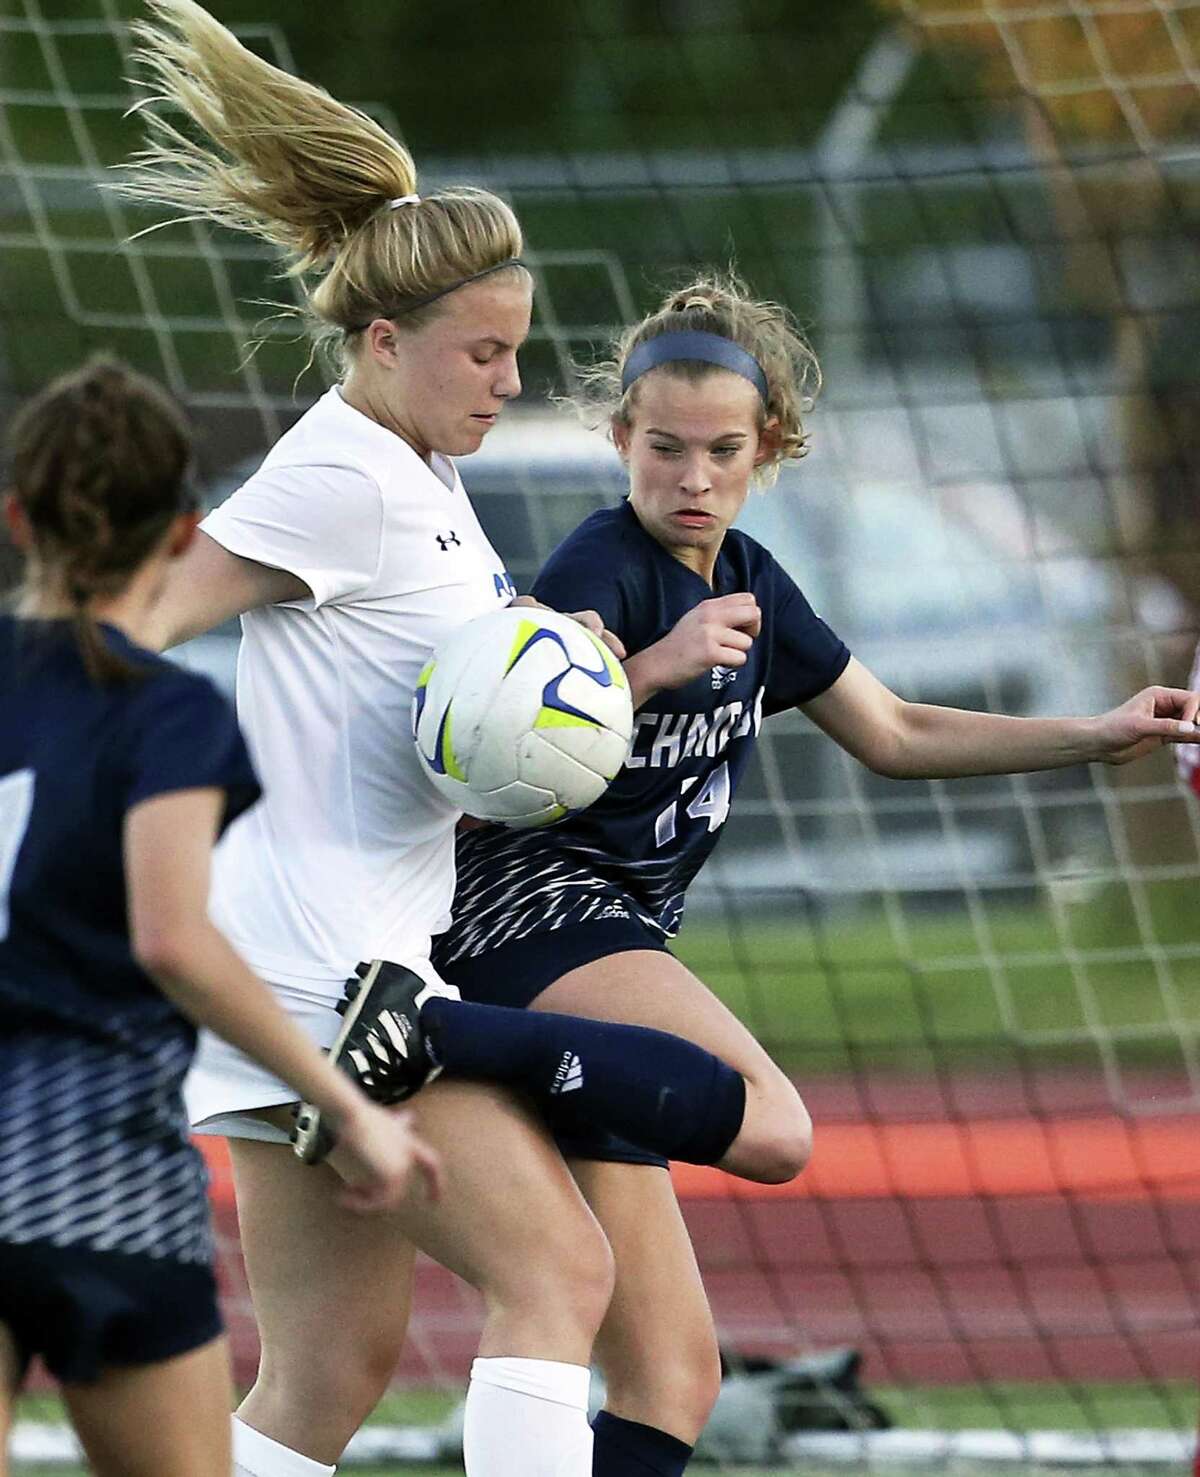 Champion's Mary Claire Stoelzing tries to heel the ball away from Abby Wagner defending against the visitor's threat on goal as the Alamo Heights hosts Champion in grils soccer at Orem Stadium on March 20, 2018.